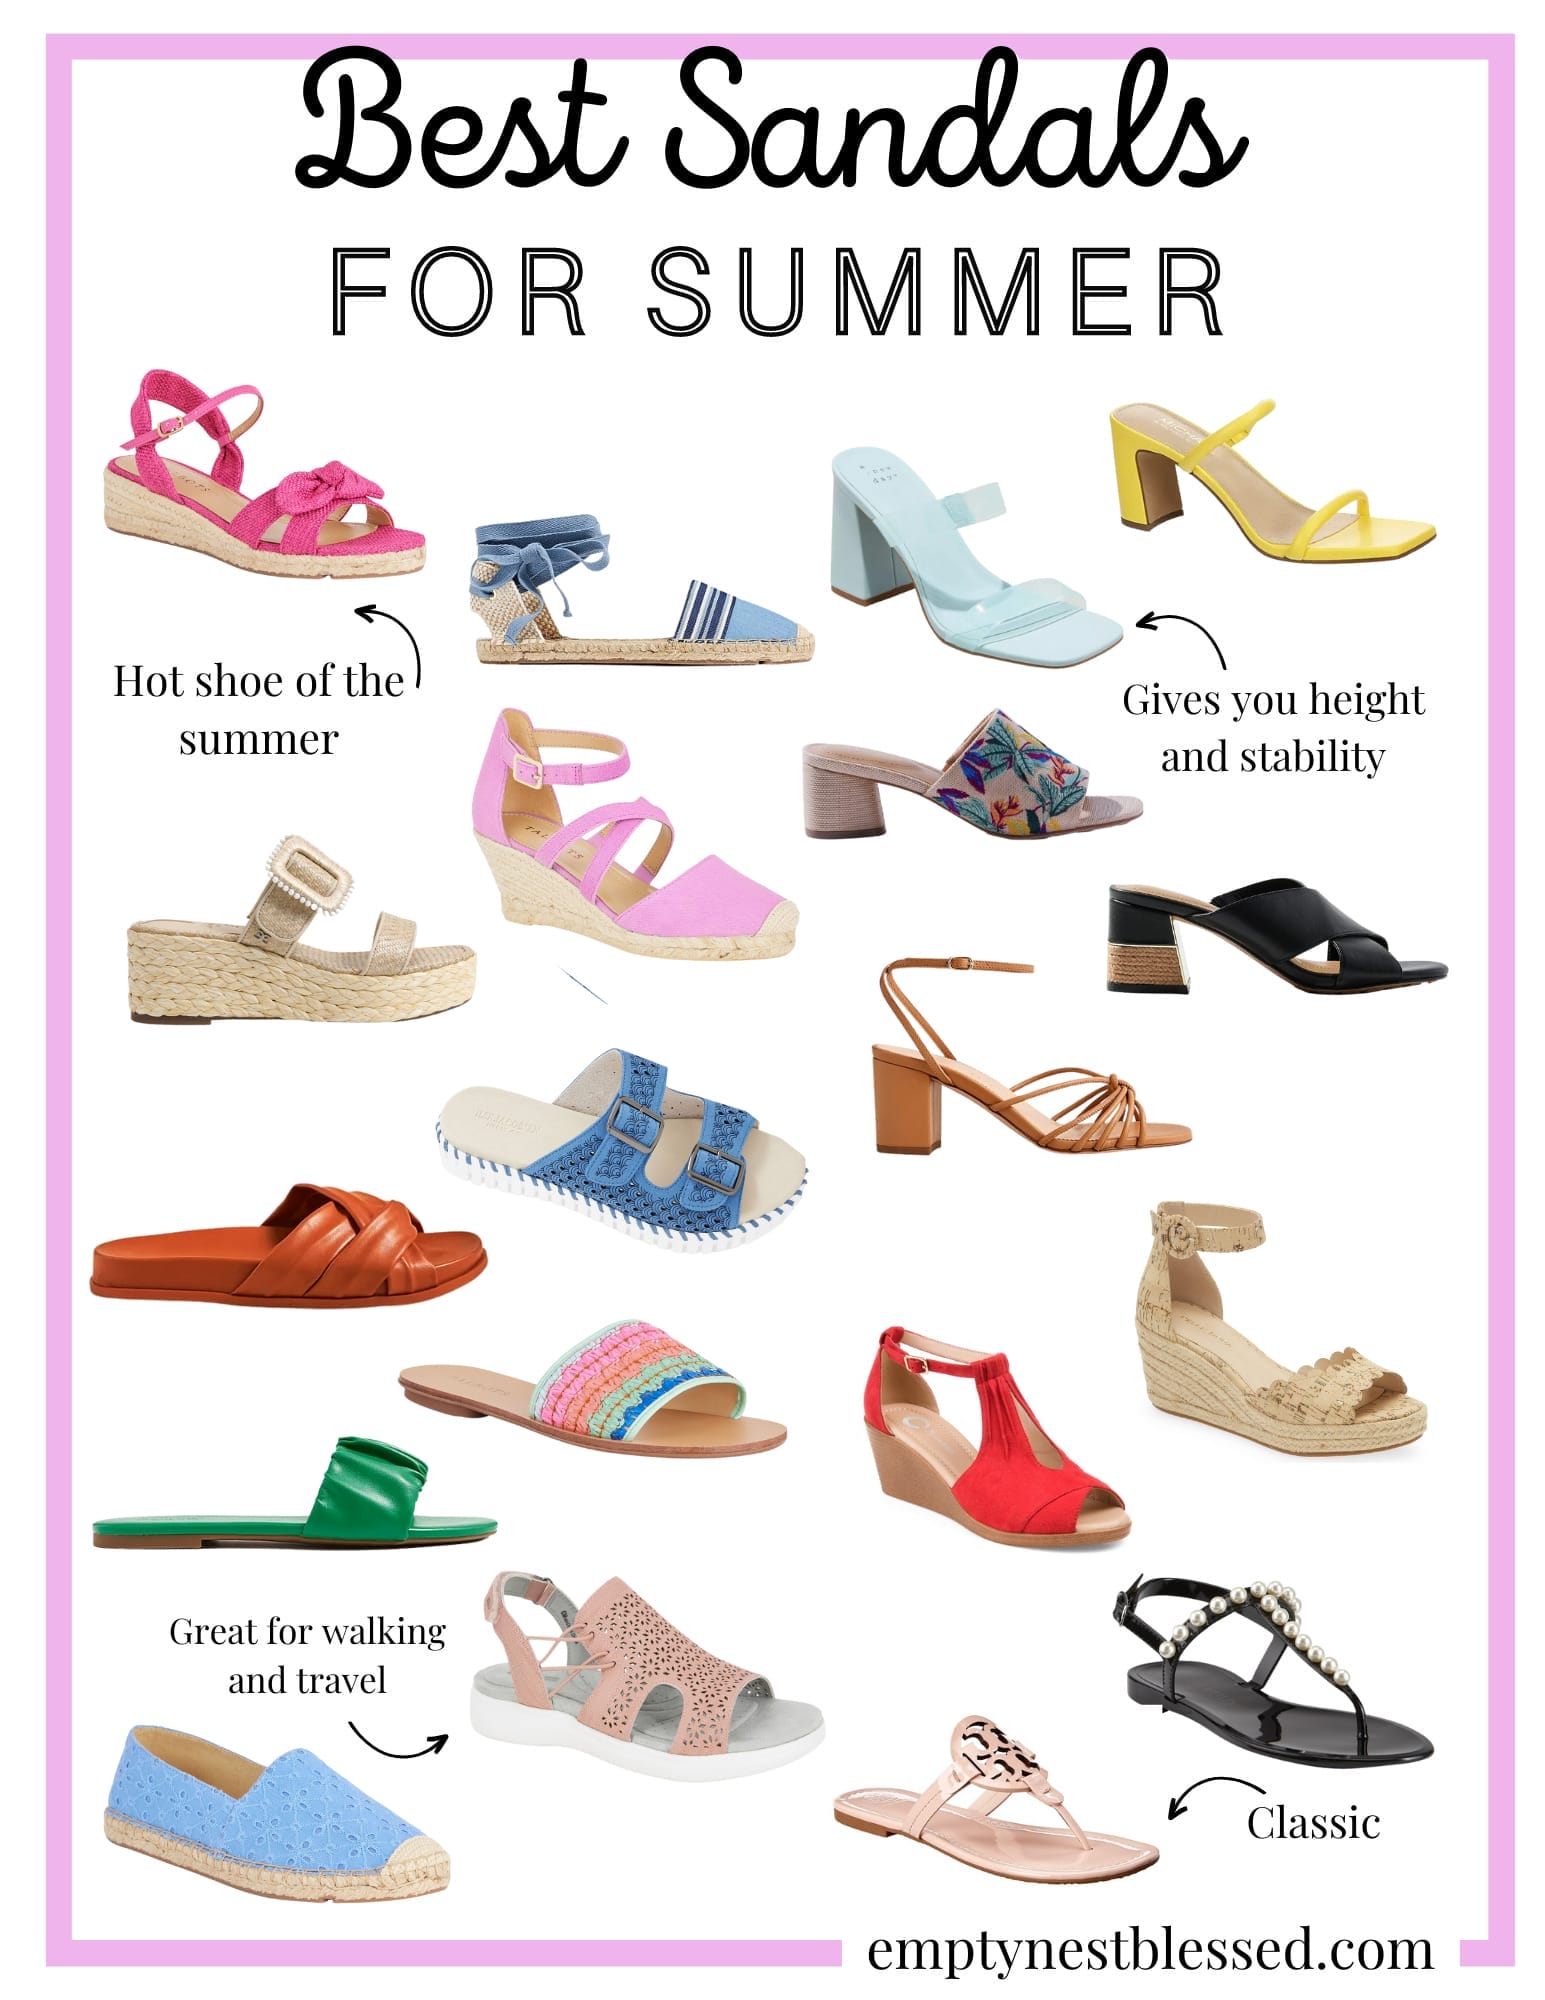 Comfort Sandals Can Be Cute and These $150 Wedges Are Proof | Us Weekly